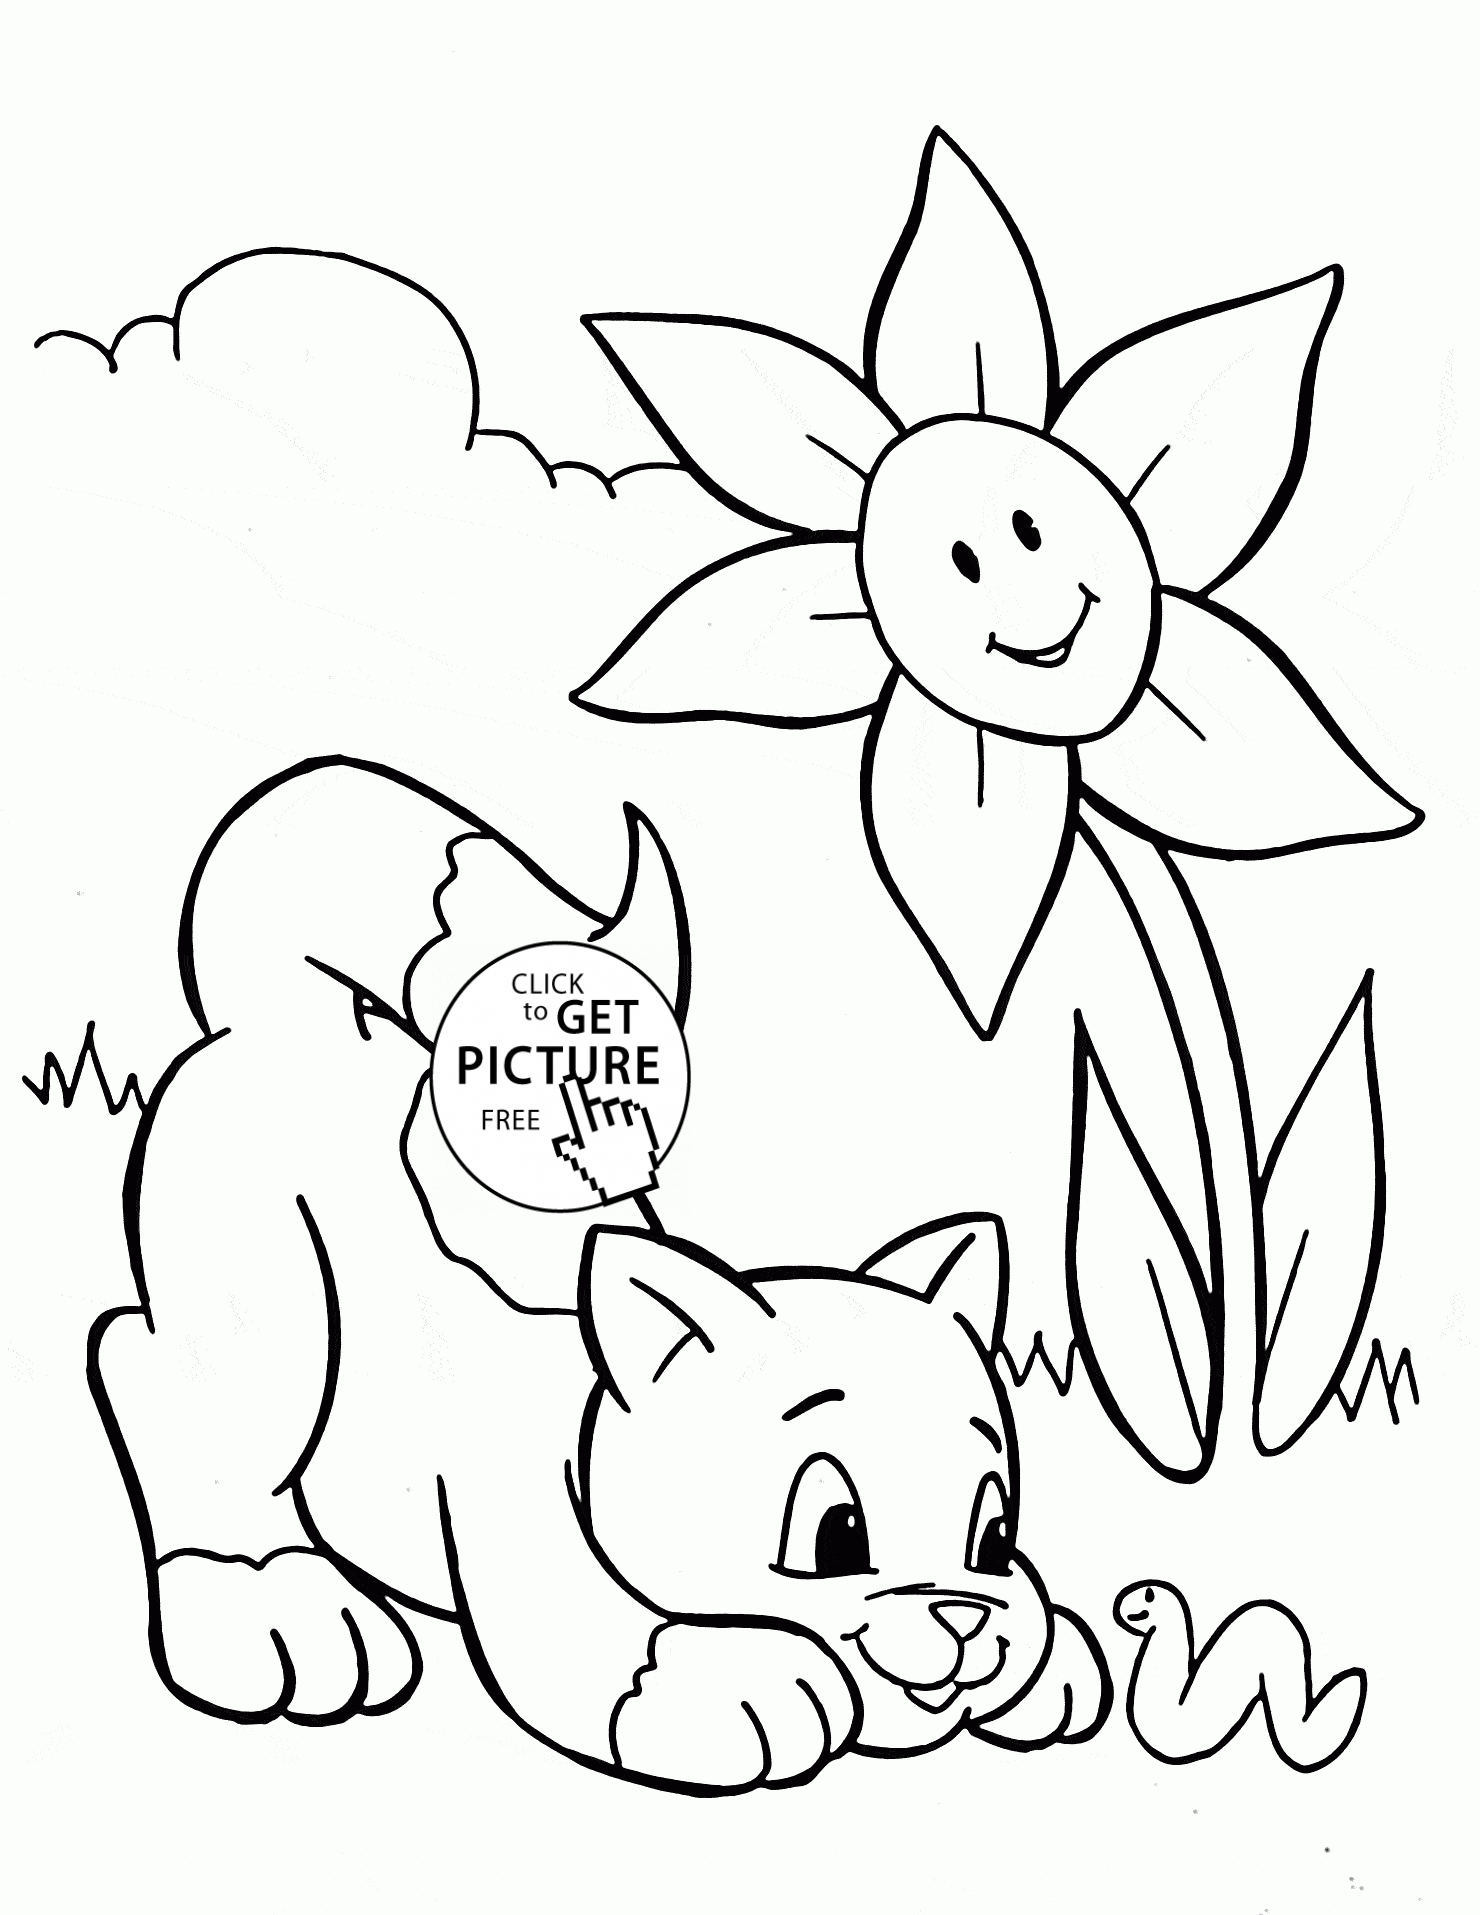 Spring Coloring Pages For Toddlers Coloring Pages Cooloring Book Awesome Spring Coloring Pages Forids